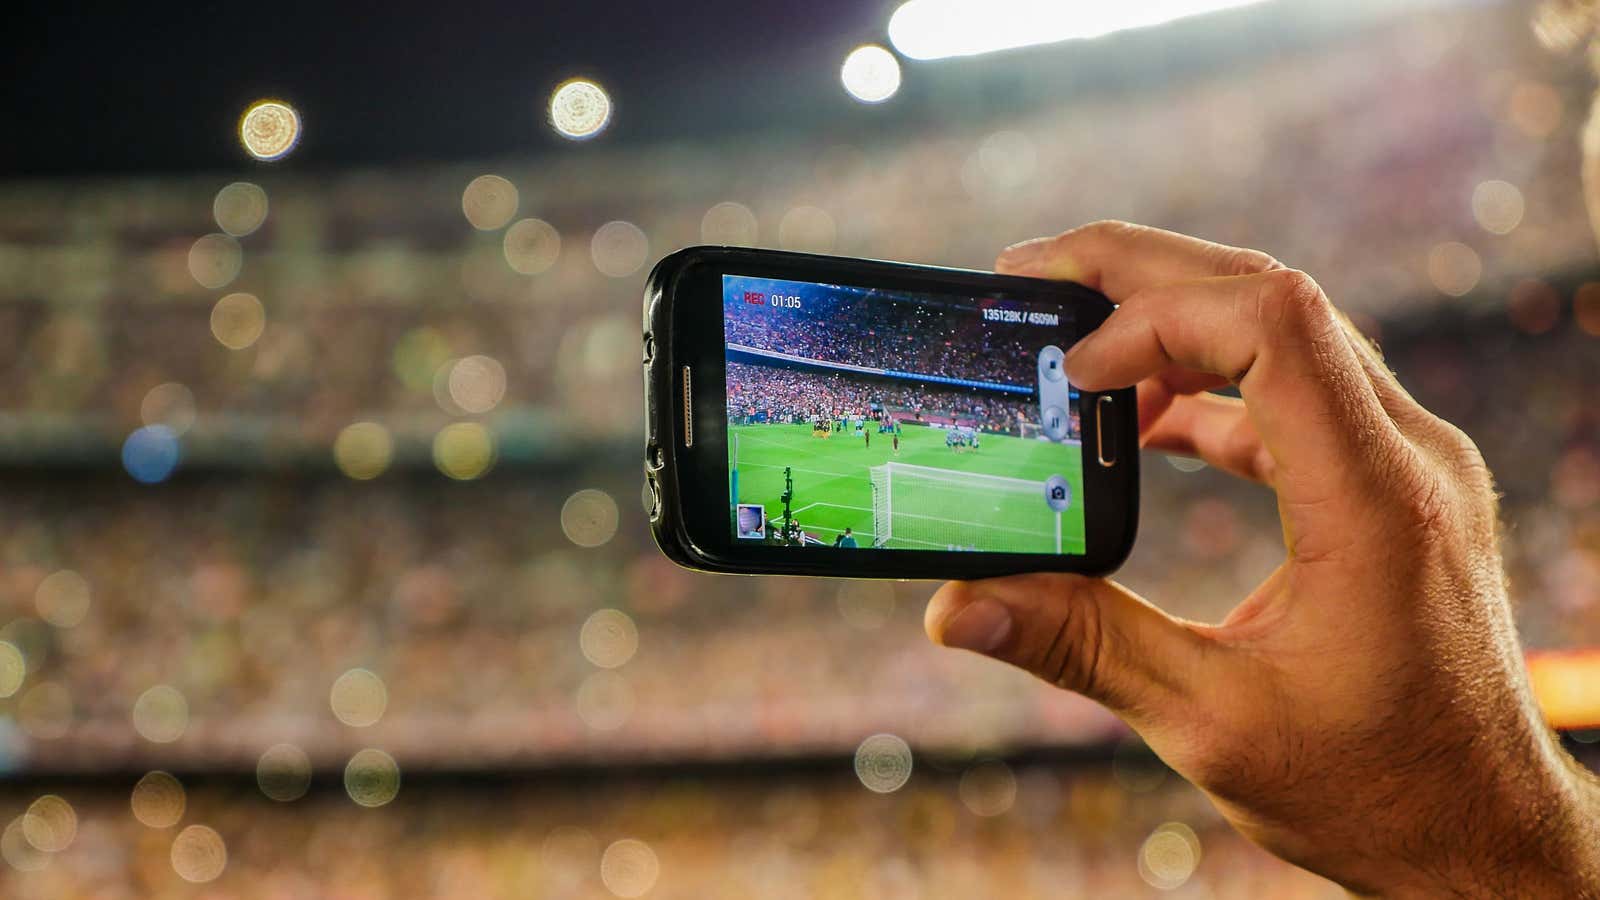 Sports will continue to thrive on digital platforms.